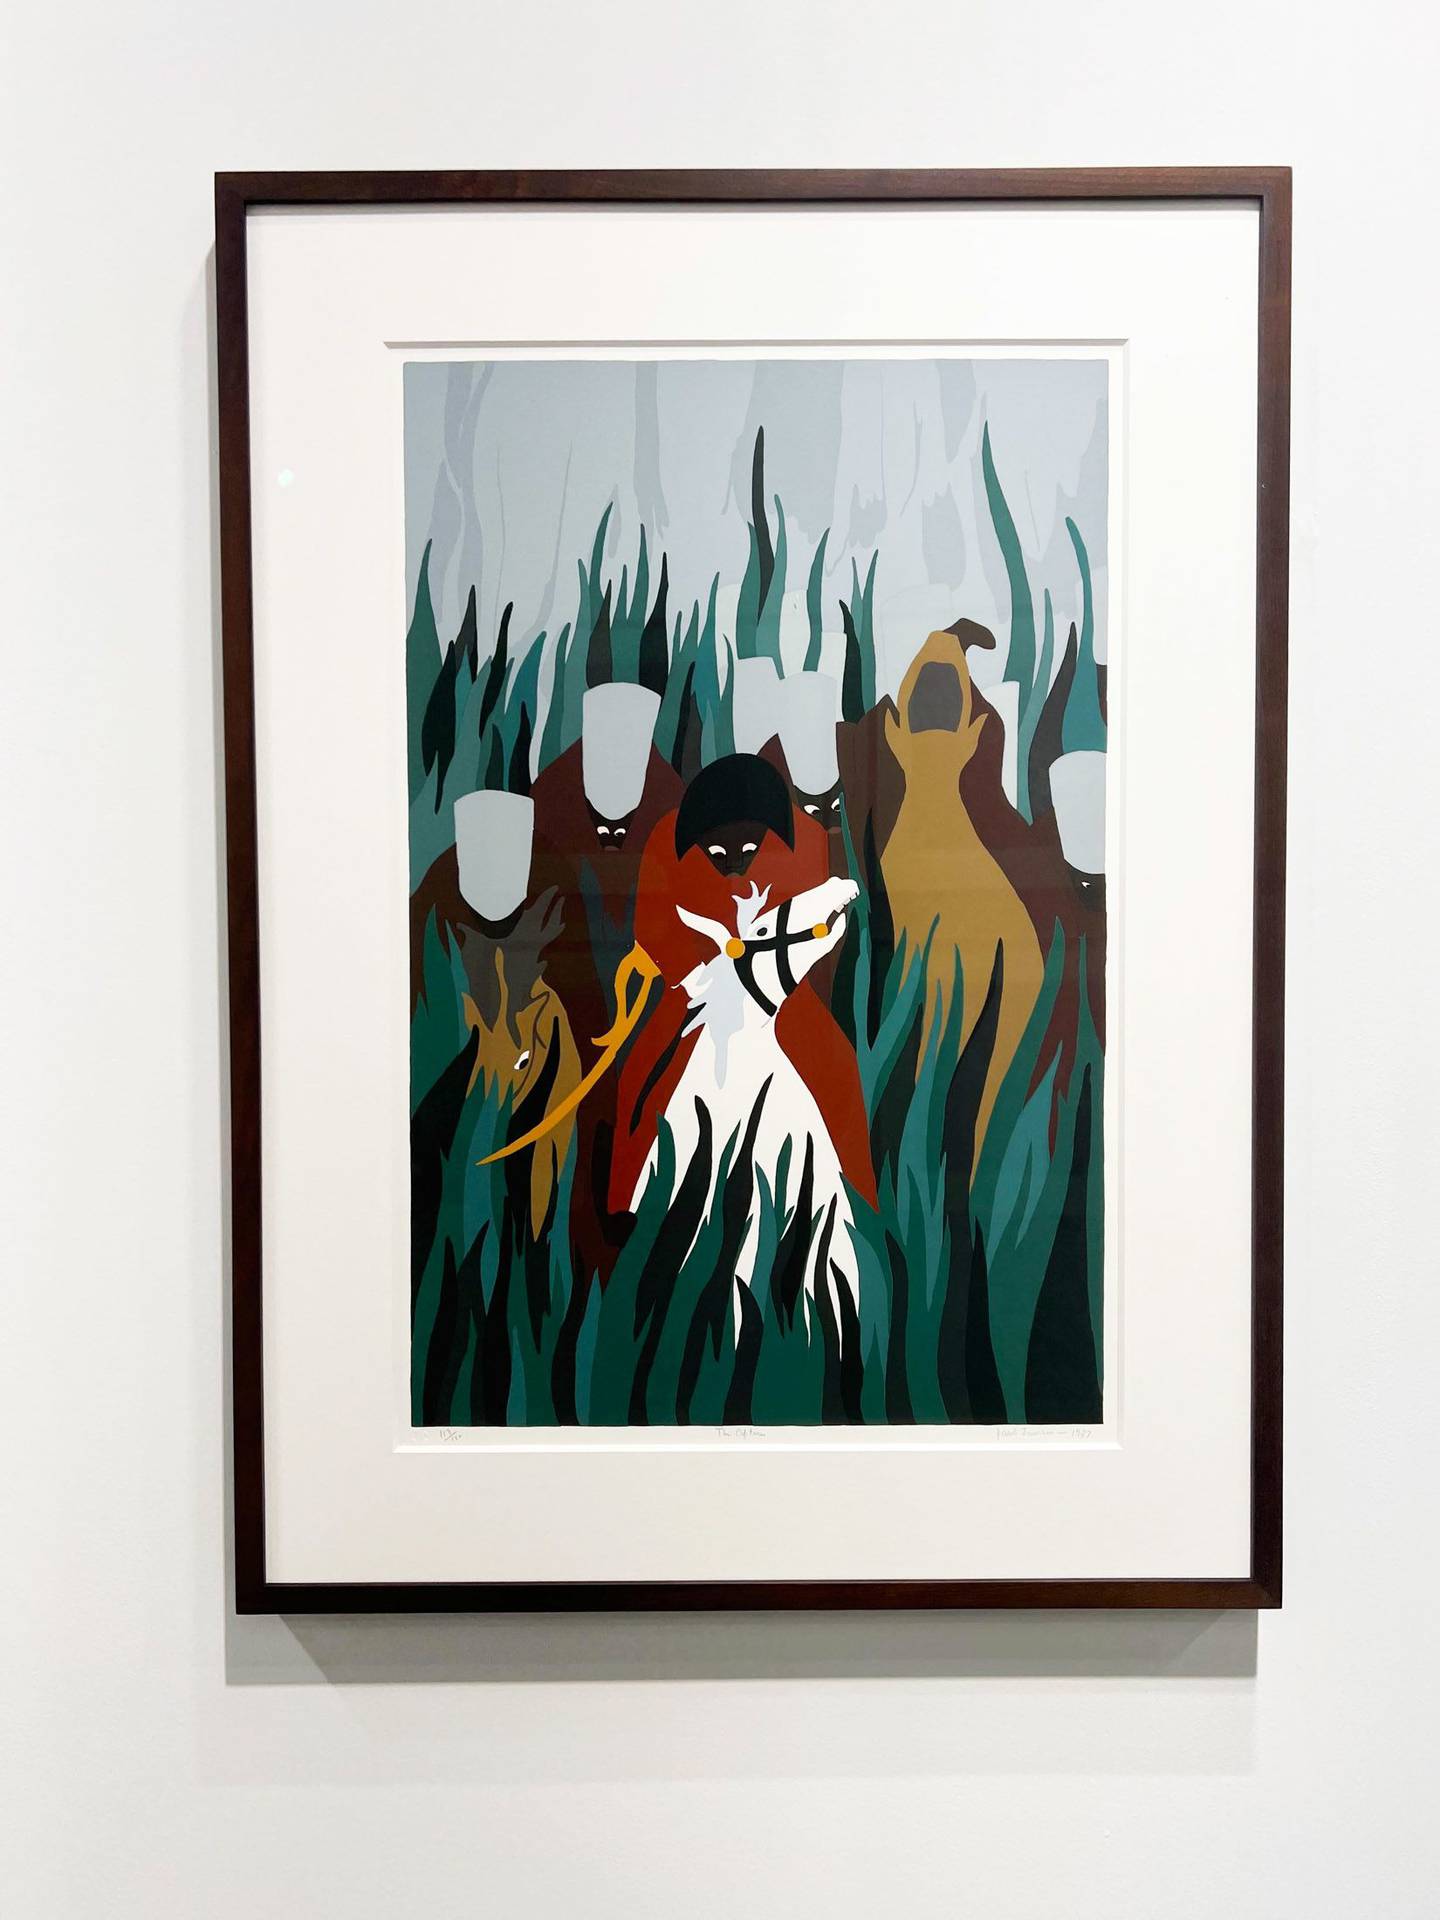 A silkscreen from Jacob Lawrence's print series,The Life of Toussaint L'Ouverture, from 1986-97 at DC Moore Gallery.dfd